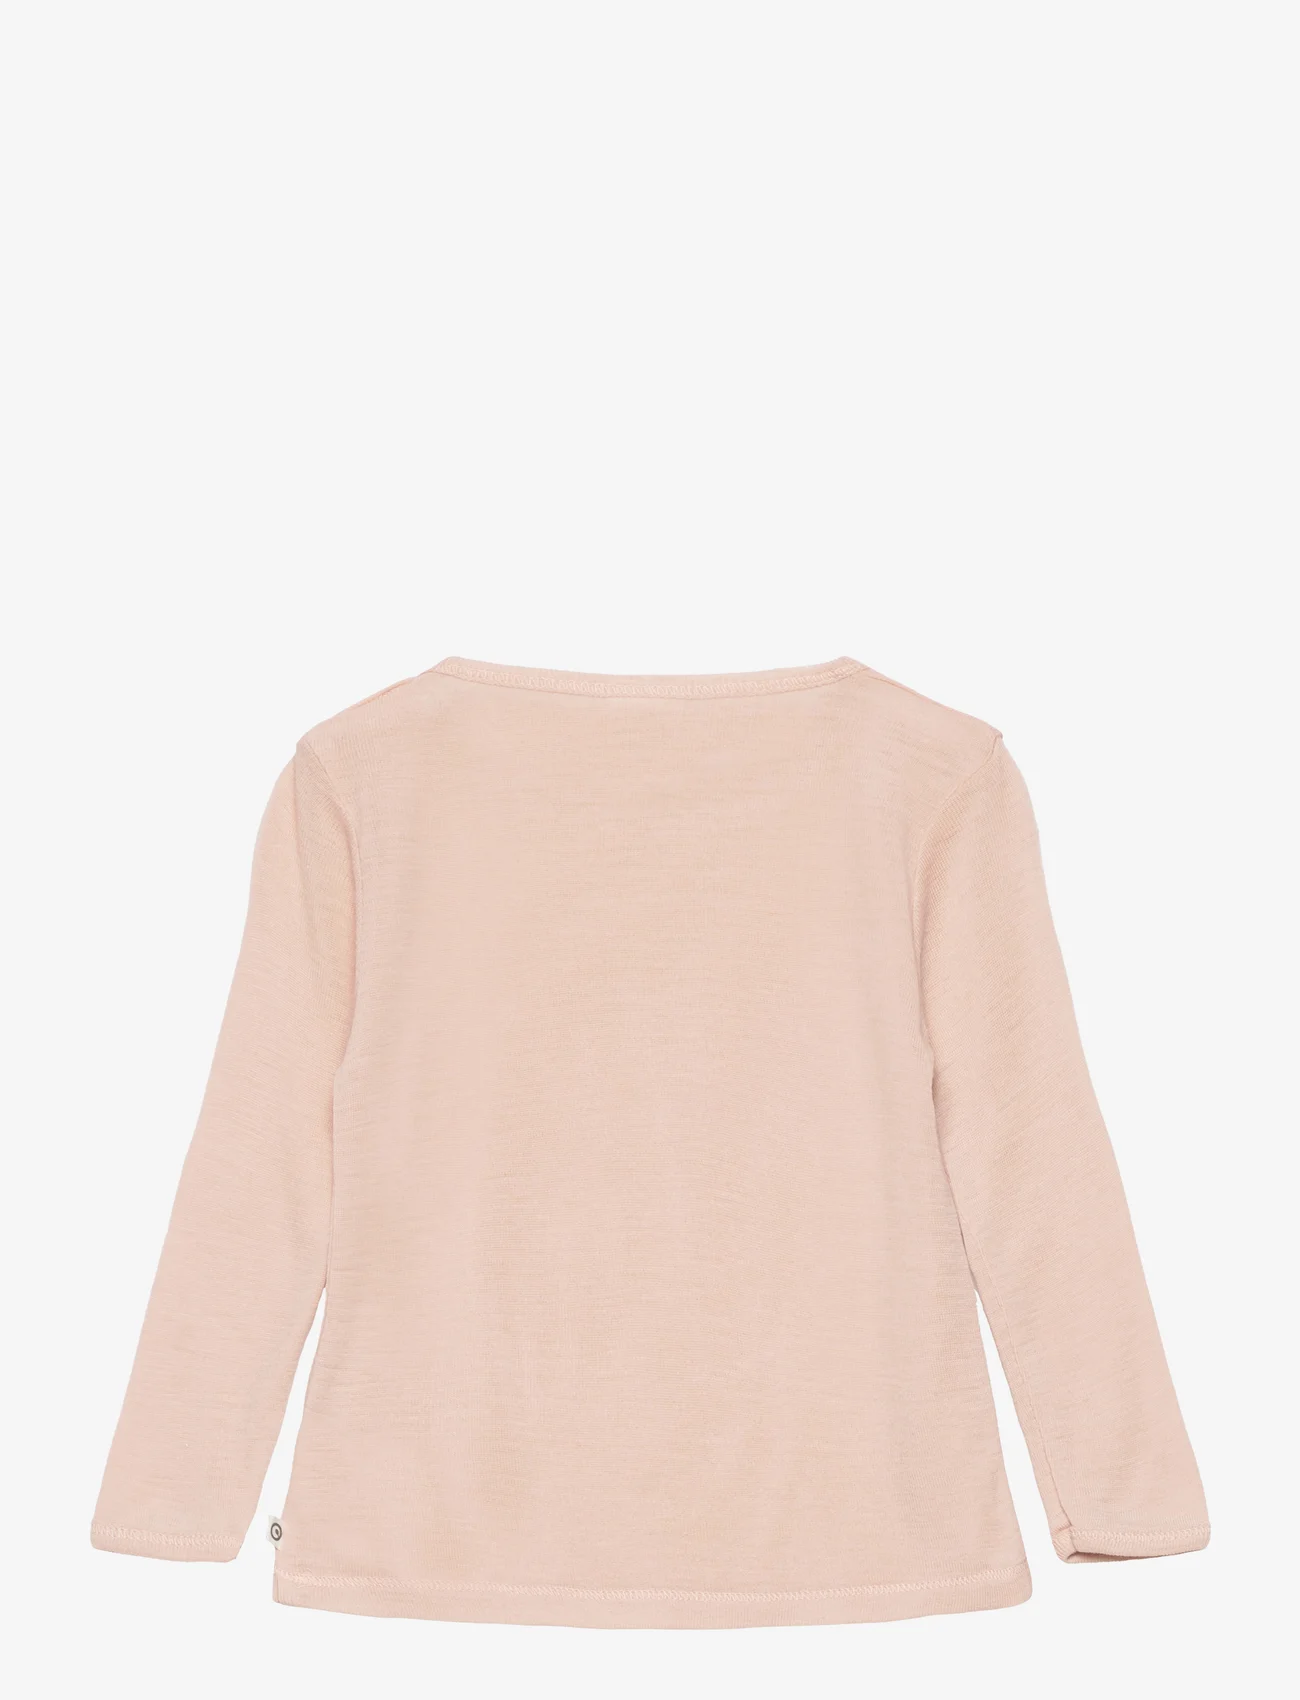 Müsli by Green Cotton - Woolly l/s T baby - lowest prices - spa rose - 1